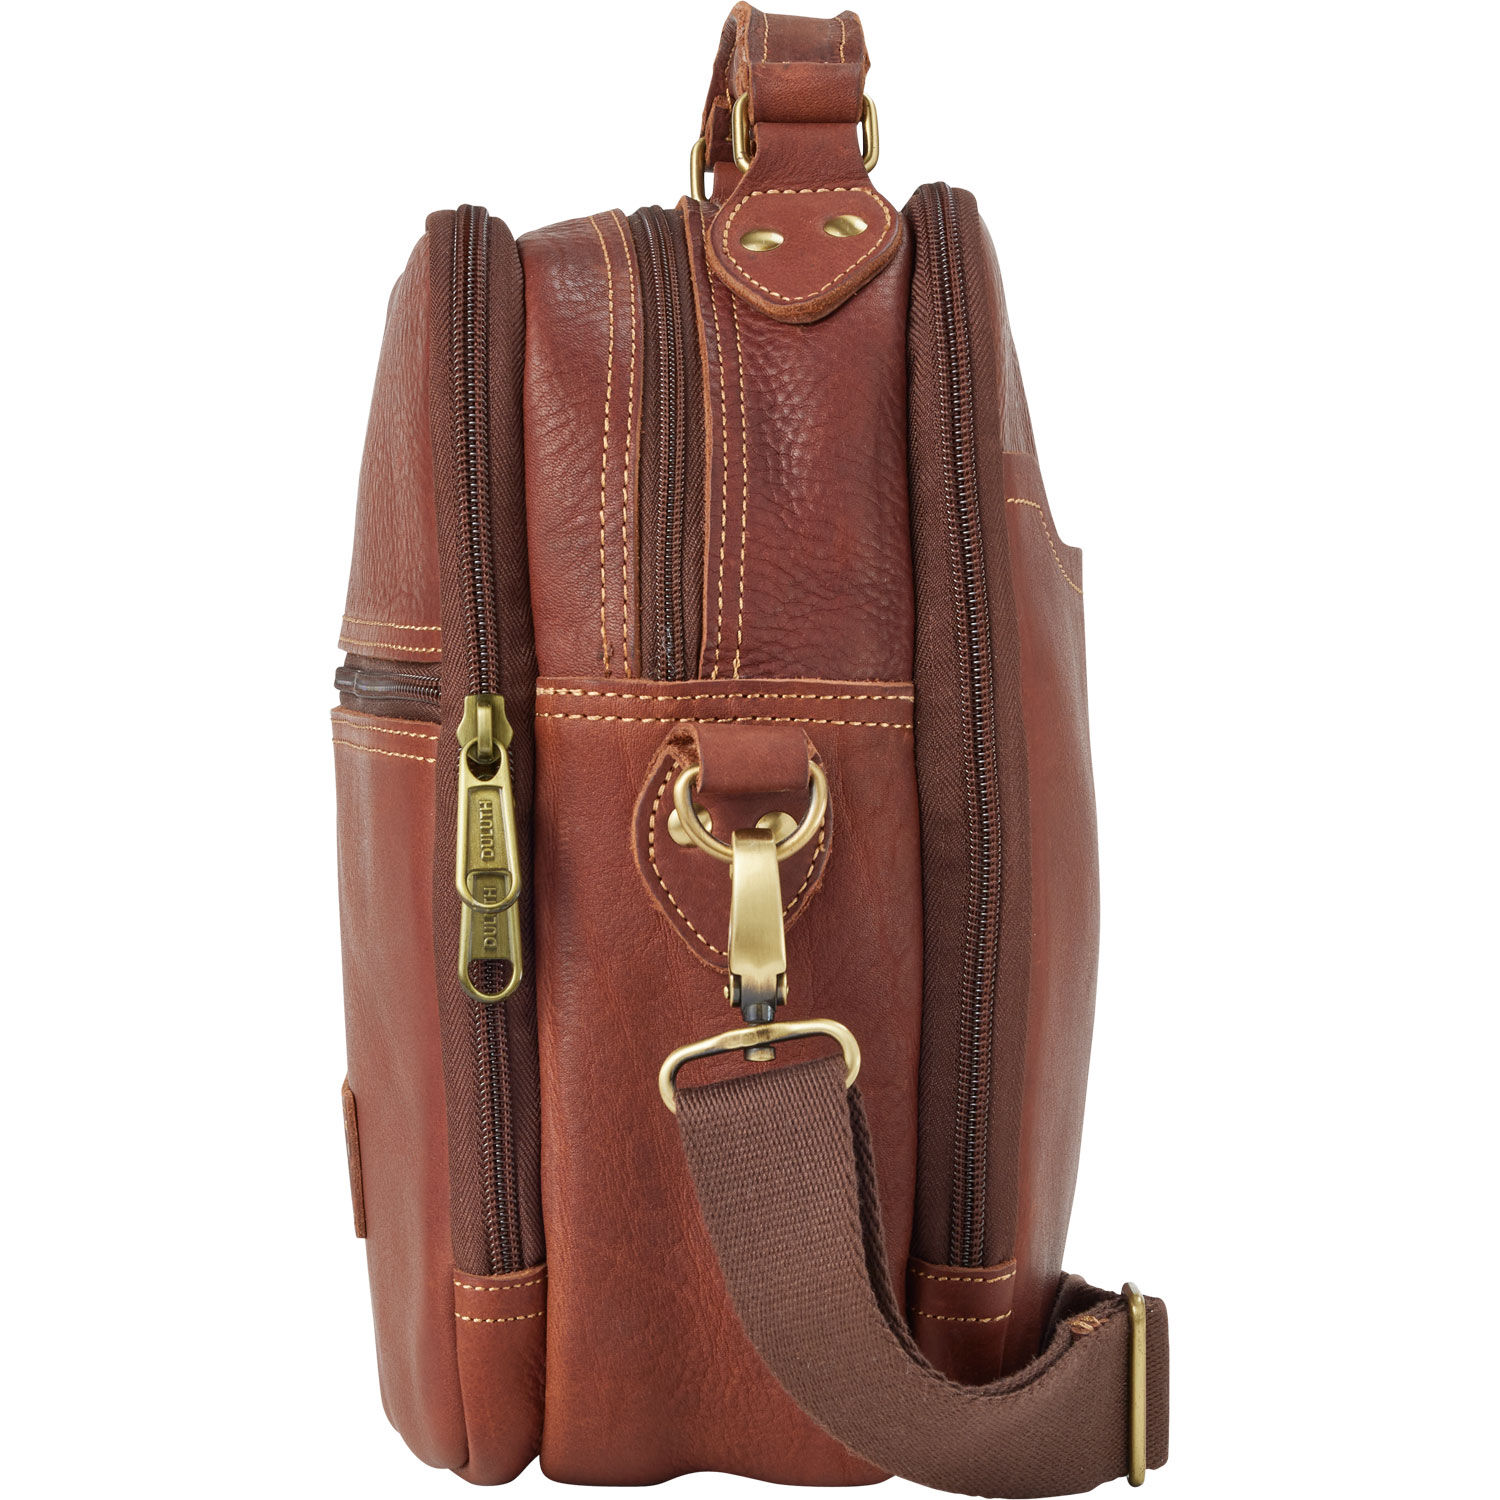 Leather AWOL Bag 20  Duluth Trading Company